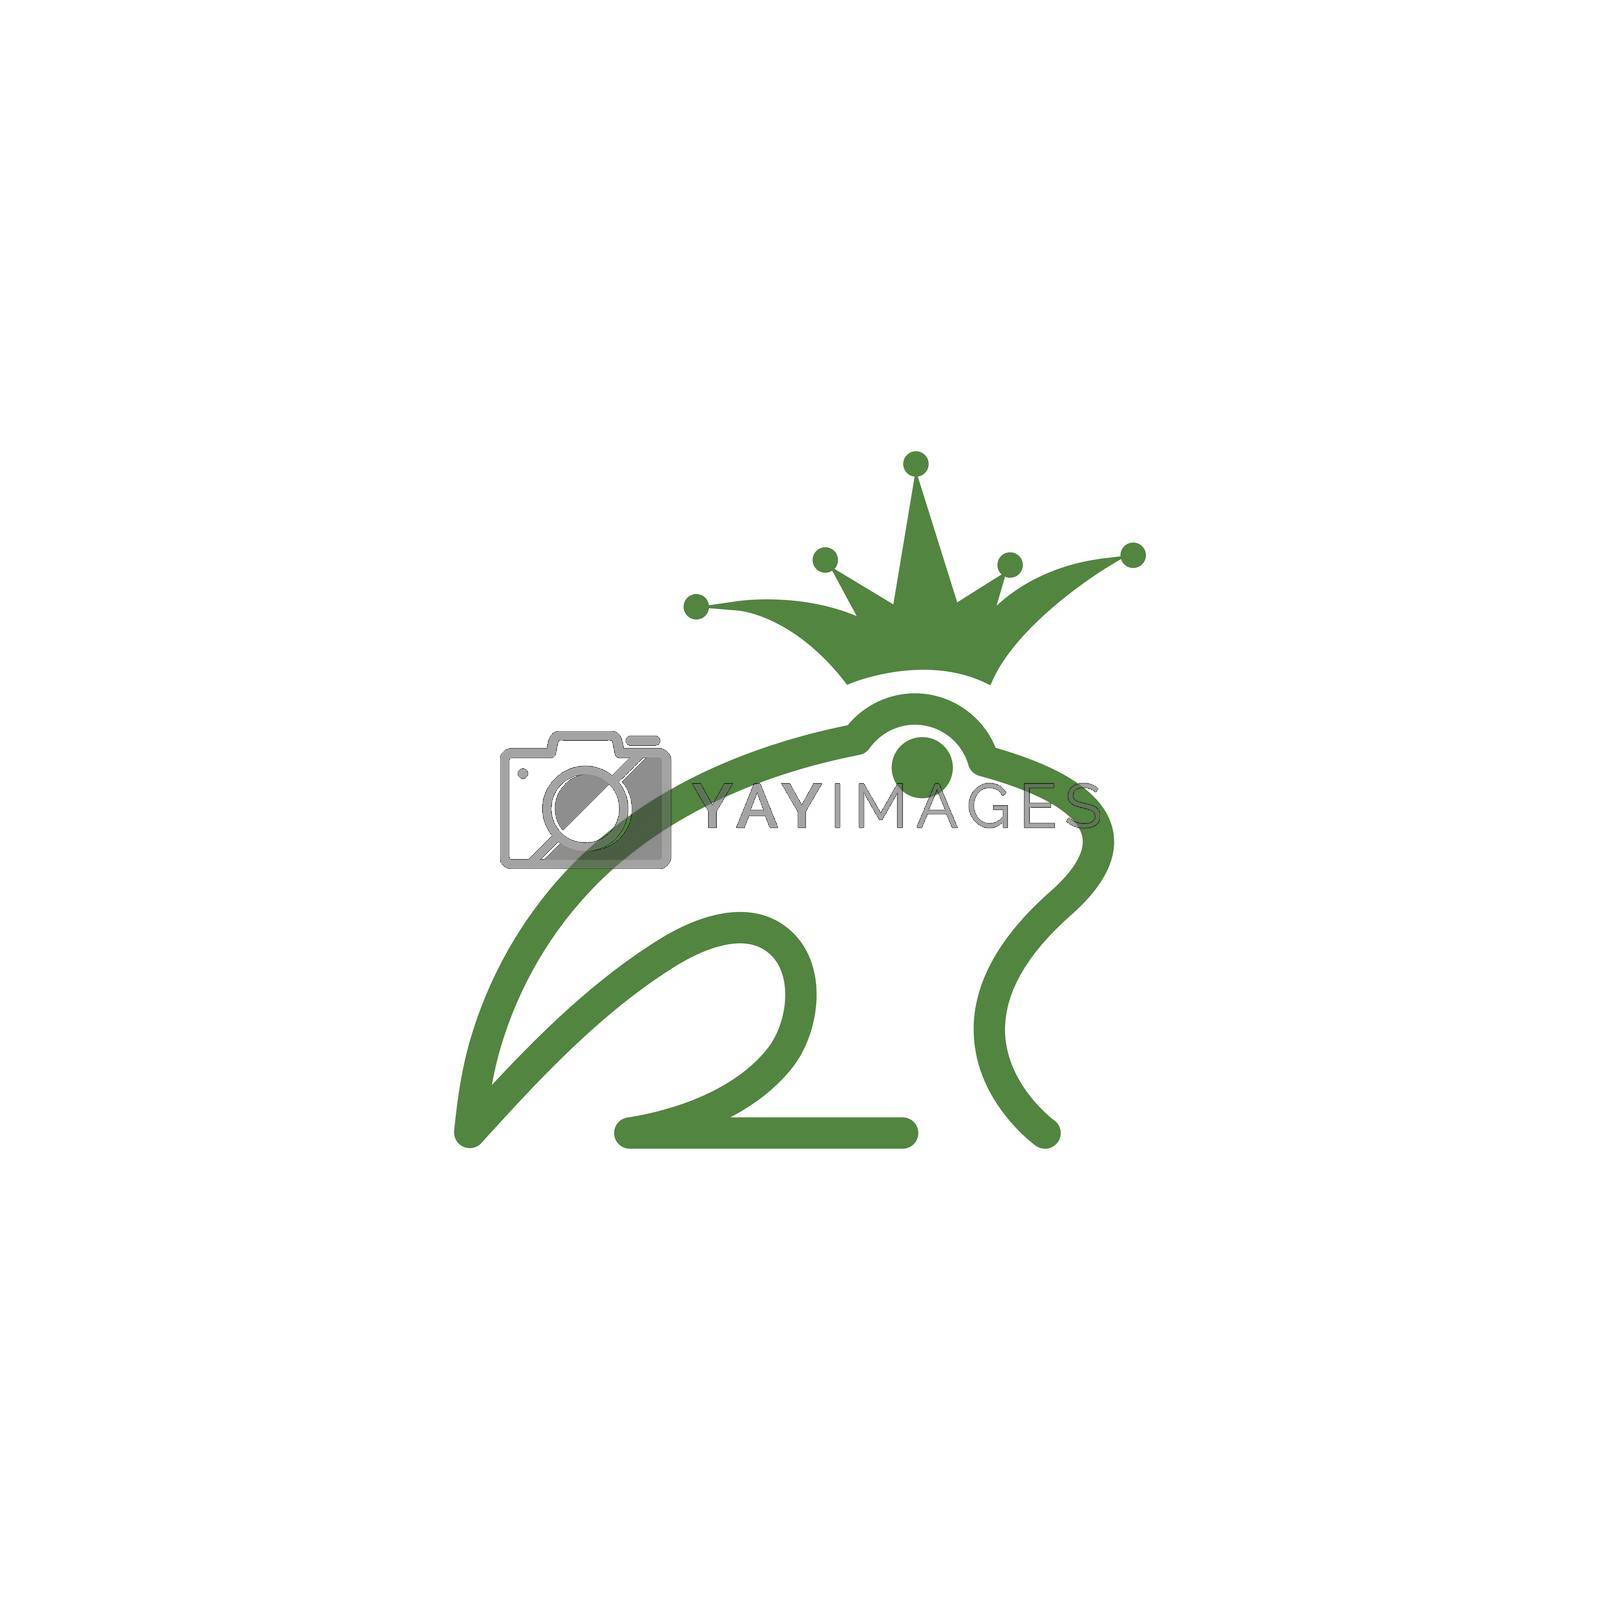 Royalty free image of Frog Logo Template by awk